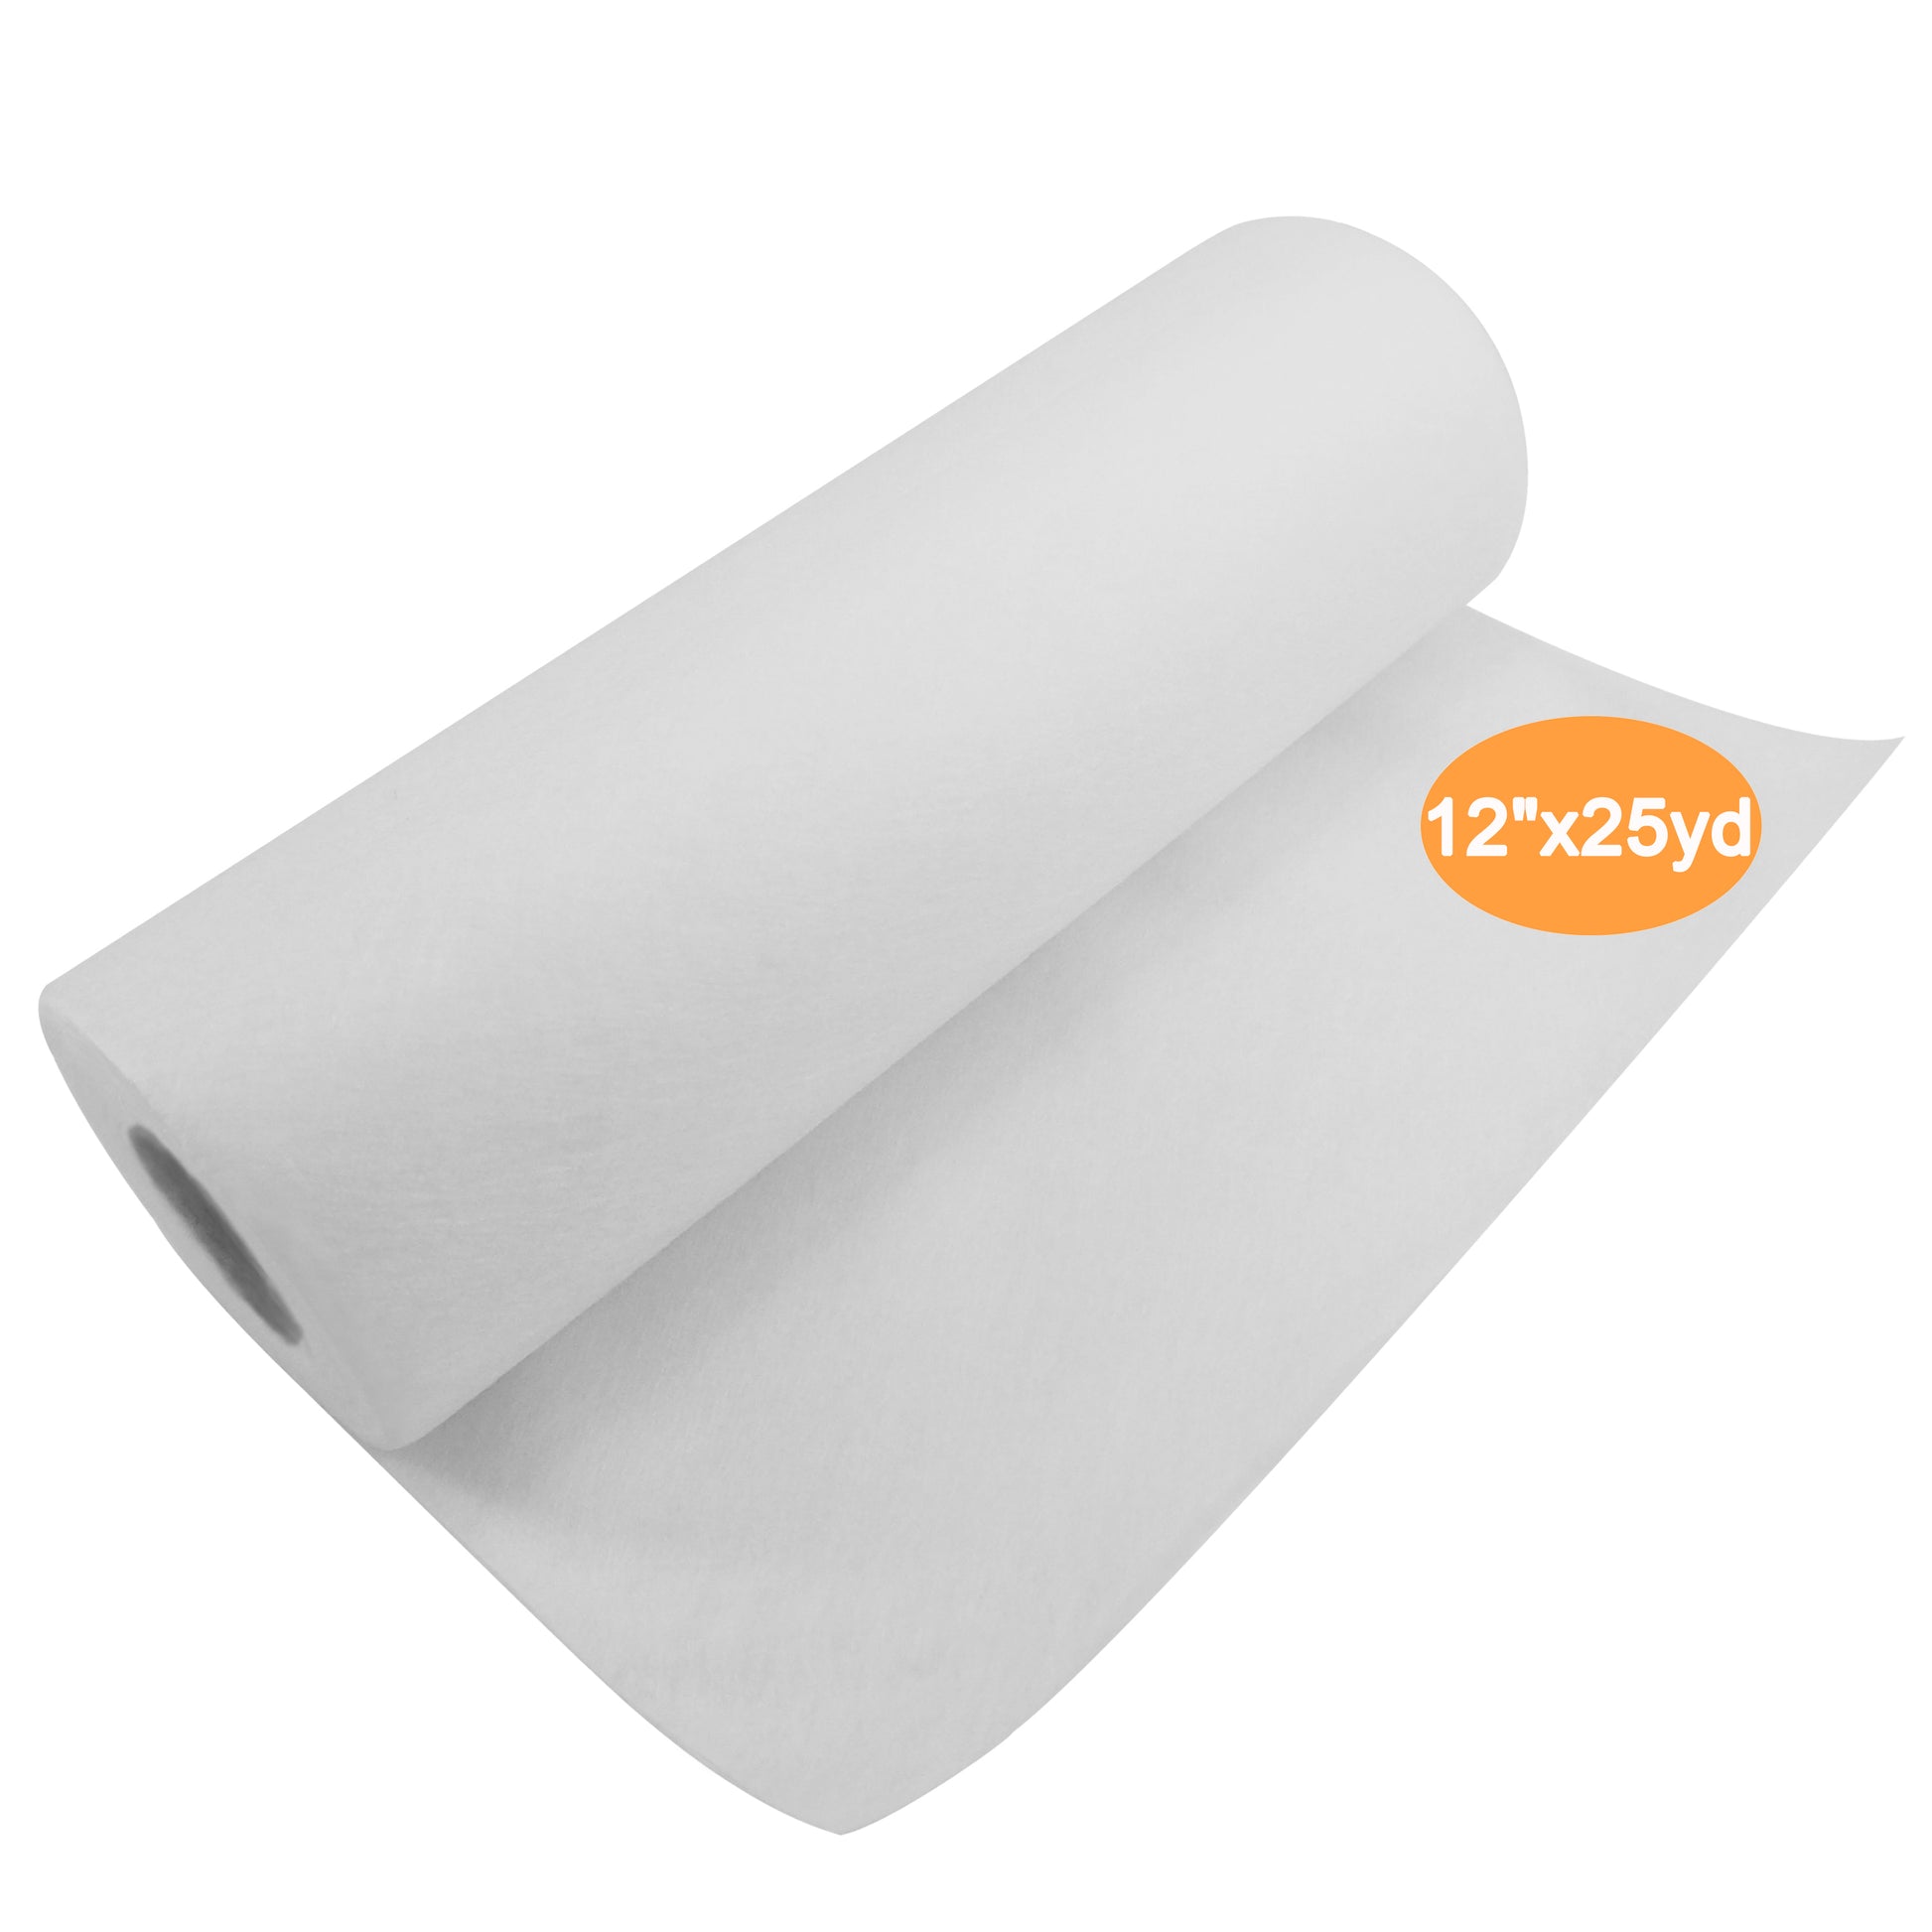 HimaPro Wash Away Non-Woven Stabilizer Backing for Machine Embroidery Water  Soluble Embroidery Stabilizer (12 Inch x 25 Yard) 